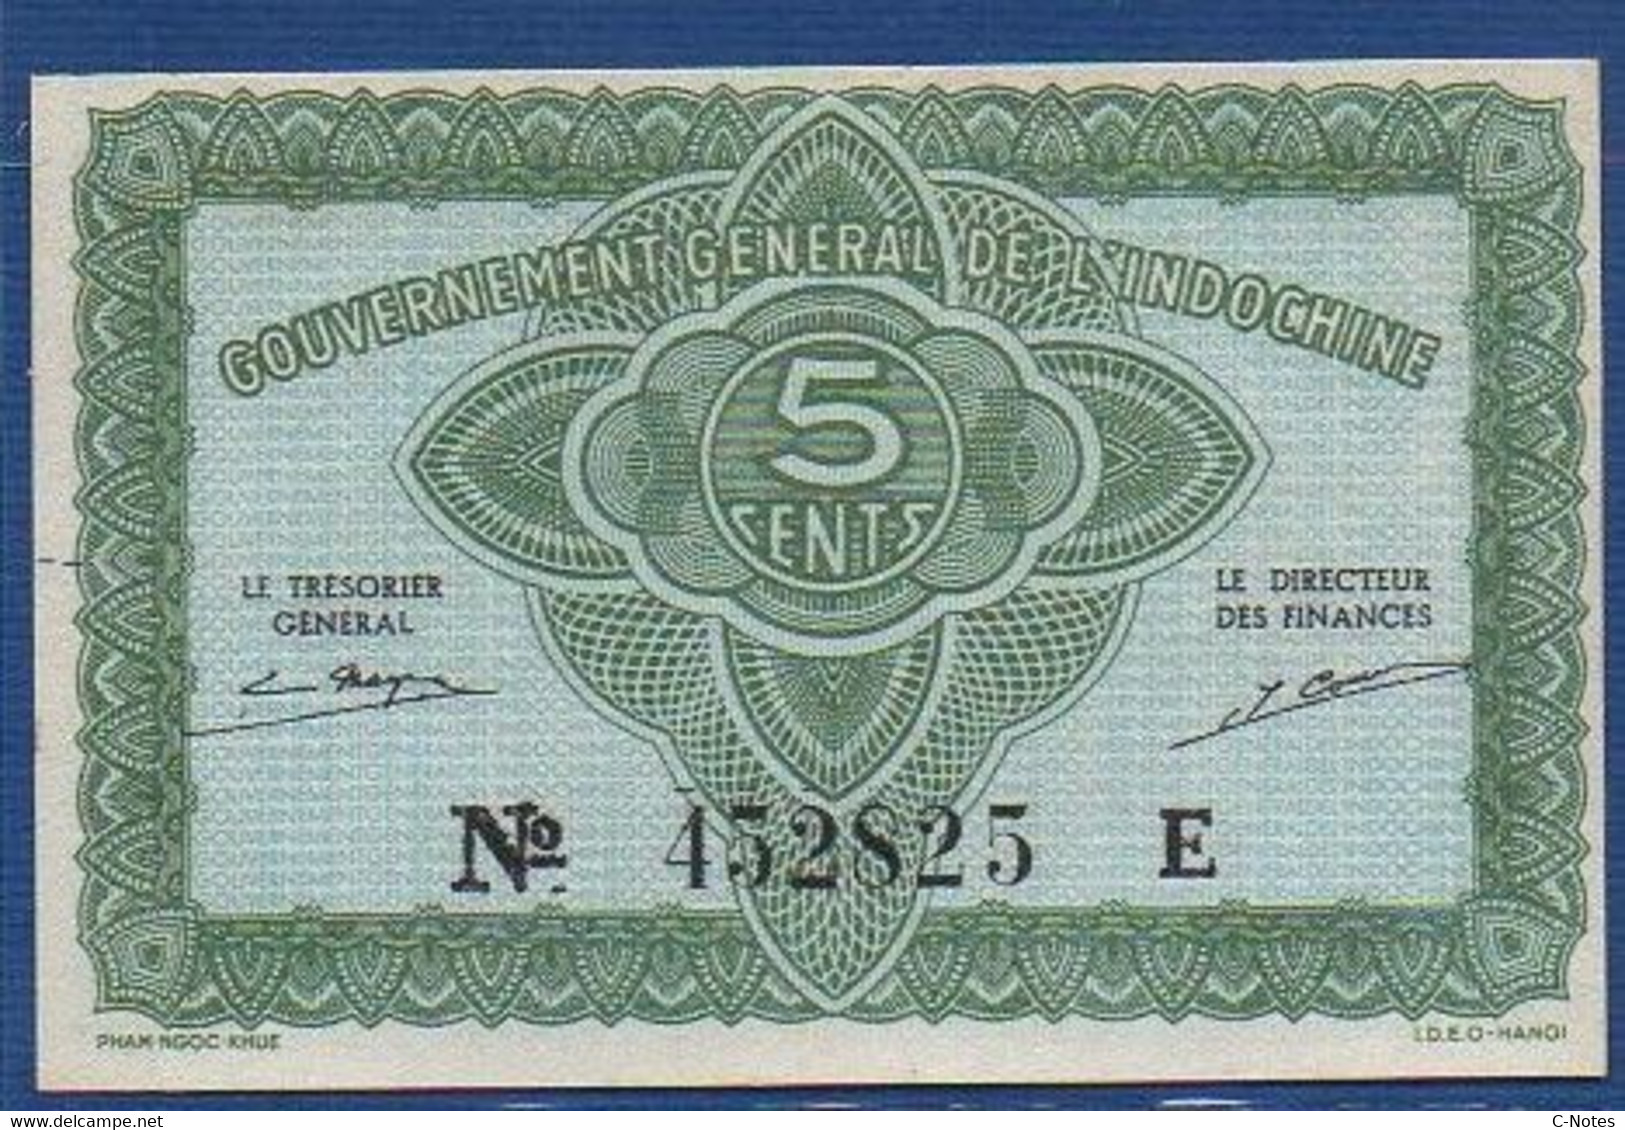 FRENCH INDOCHINA - P. 88a –  5 Cents ND (1942) AUNC-, S/n 452825 E - Indochina